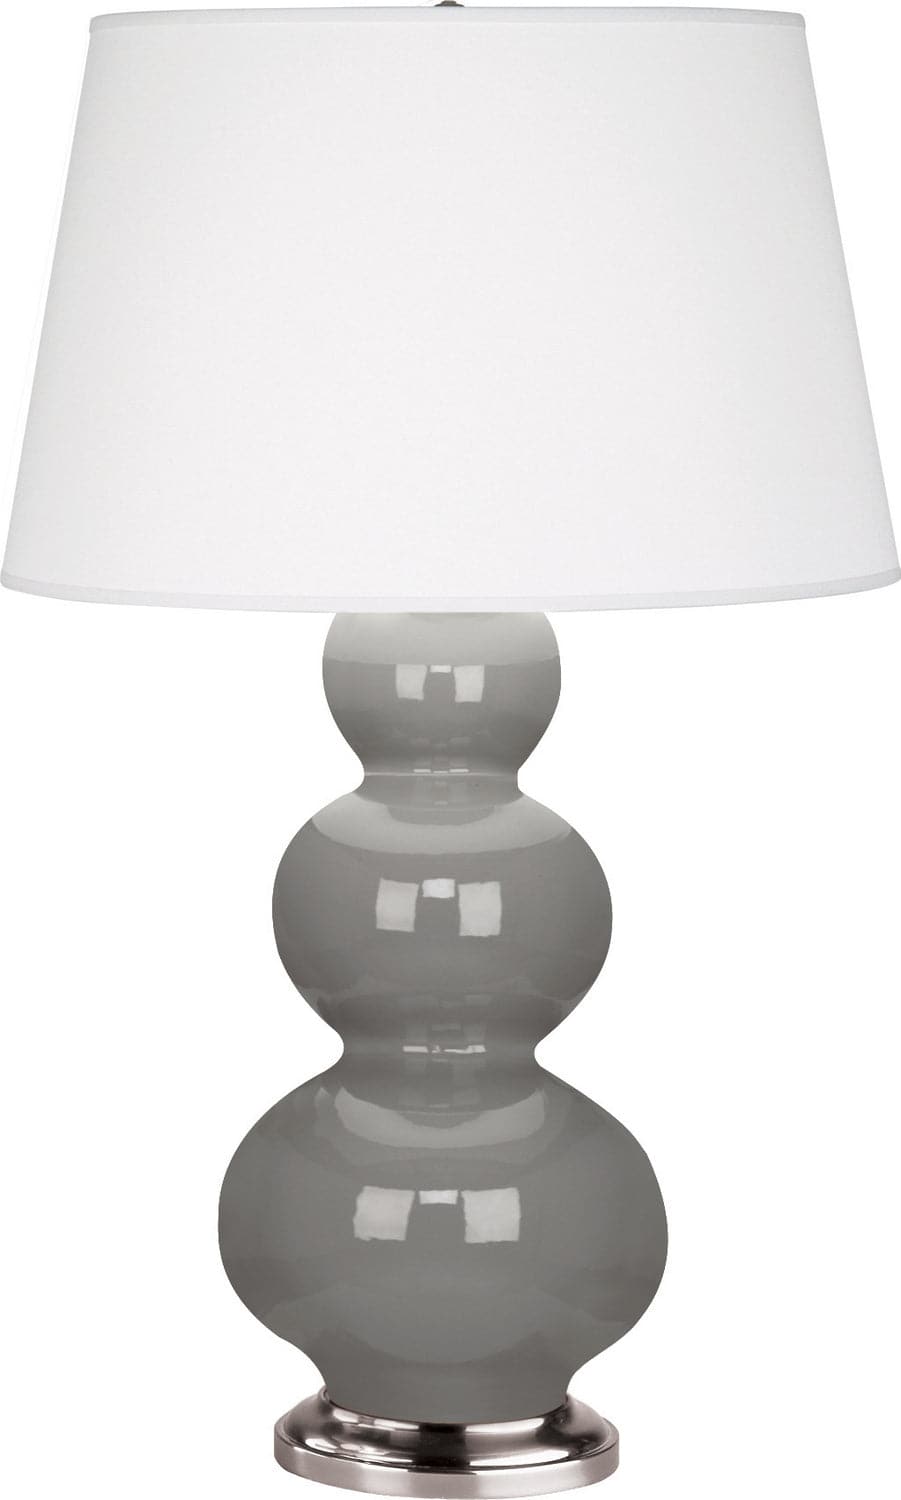 Robert Abbey - 359X - One Light Table Lamp - Triple Gourd - Smokey Taupe Glazed w/Antique Silver